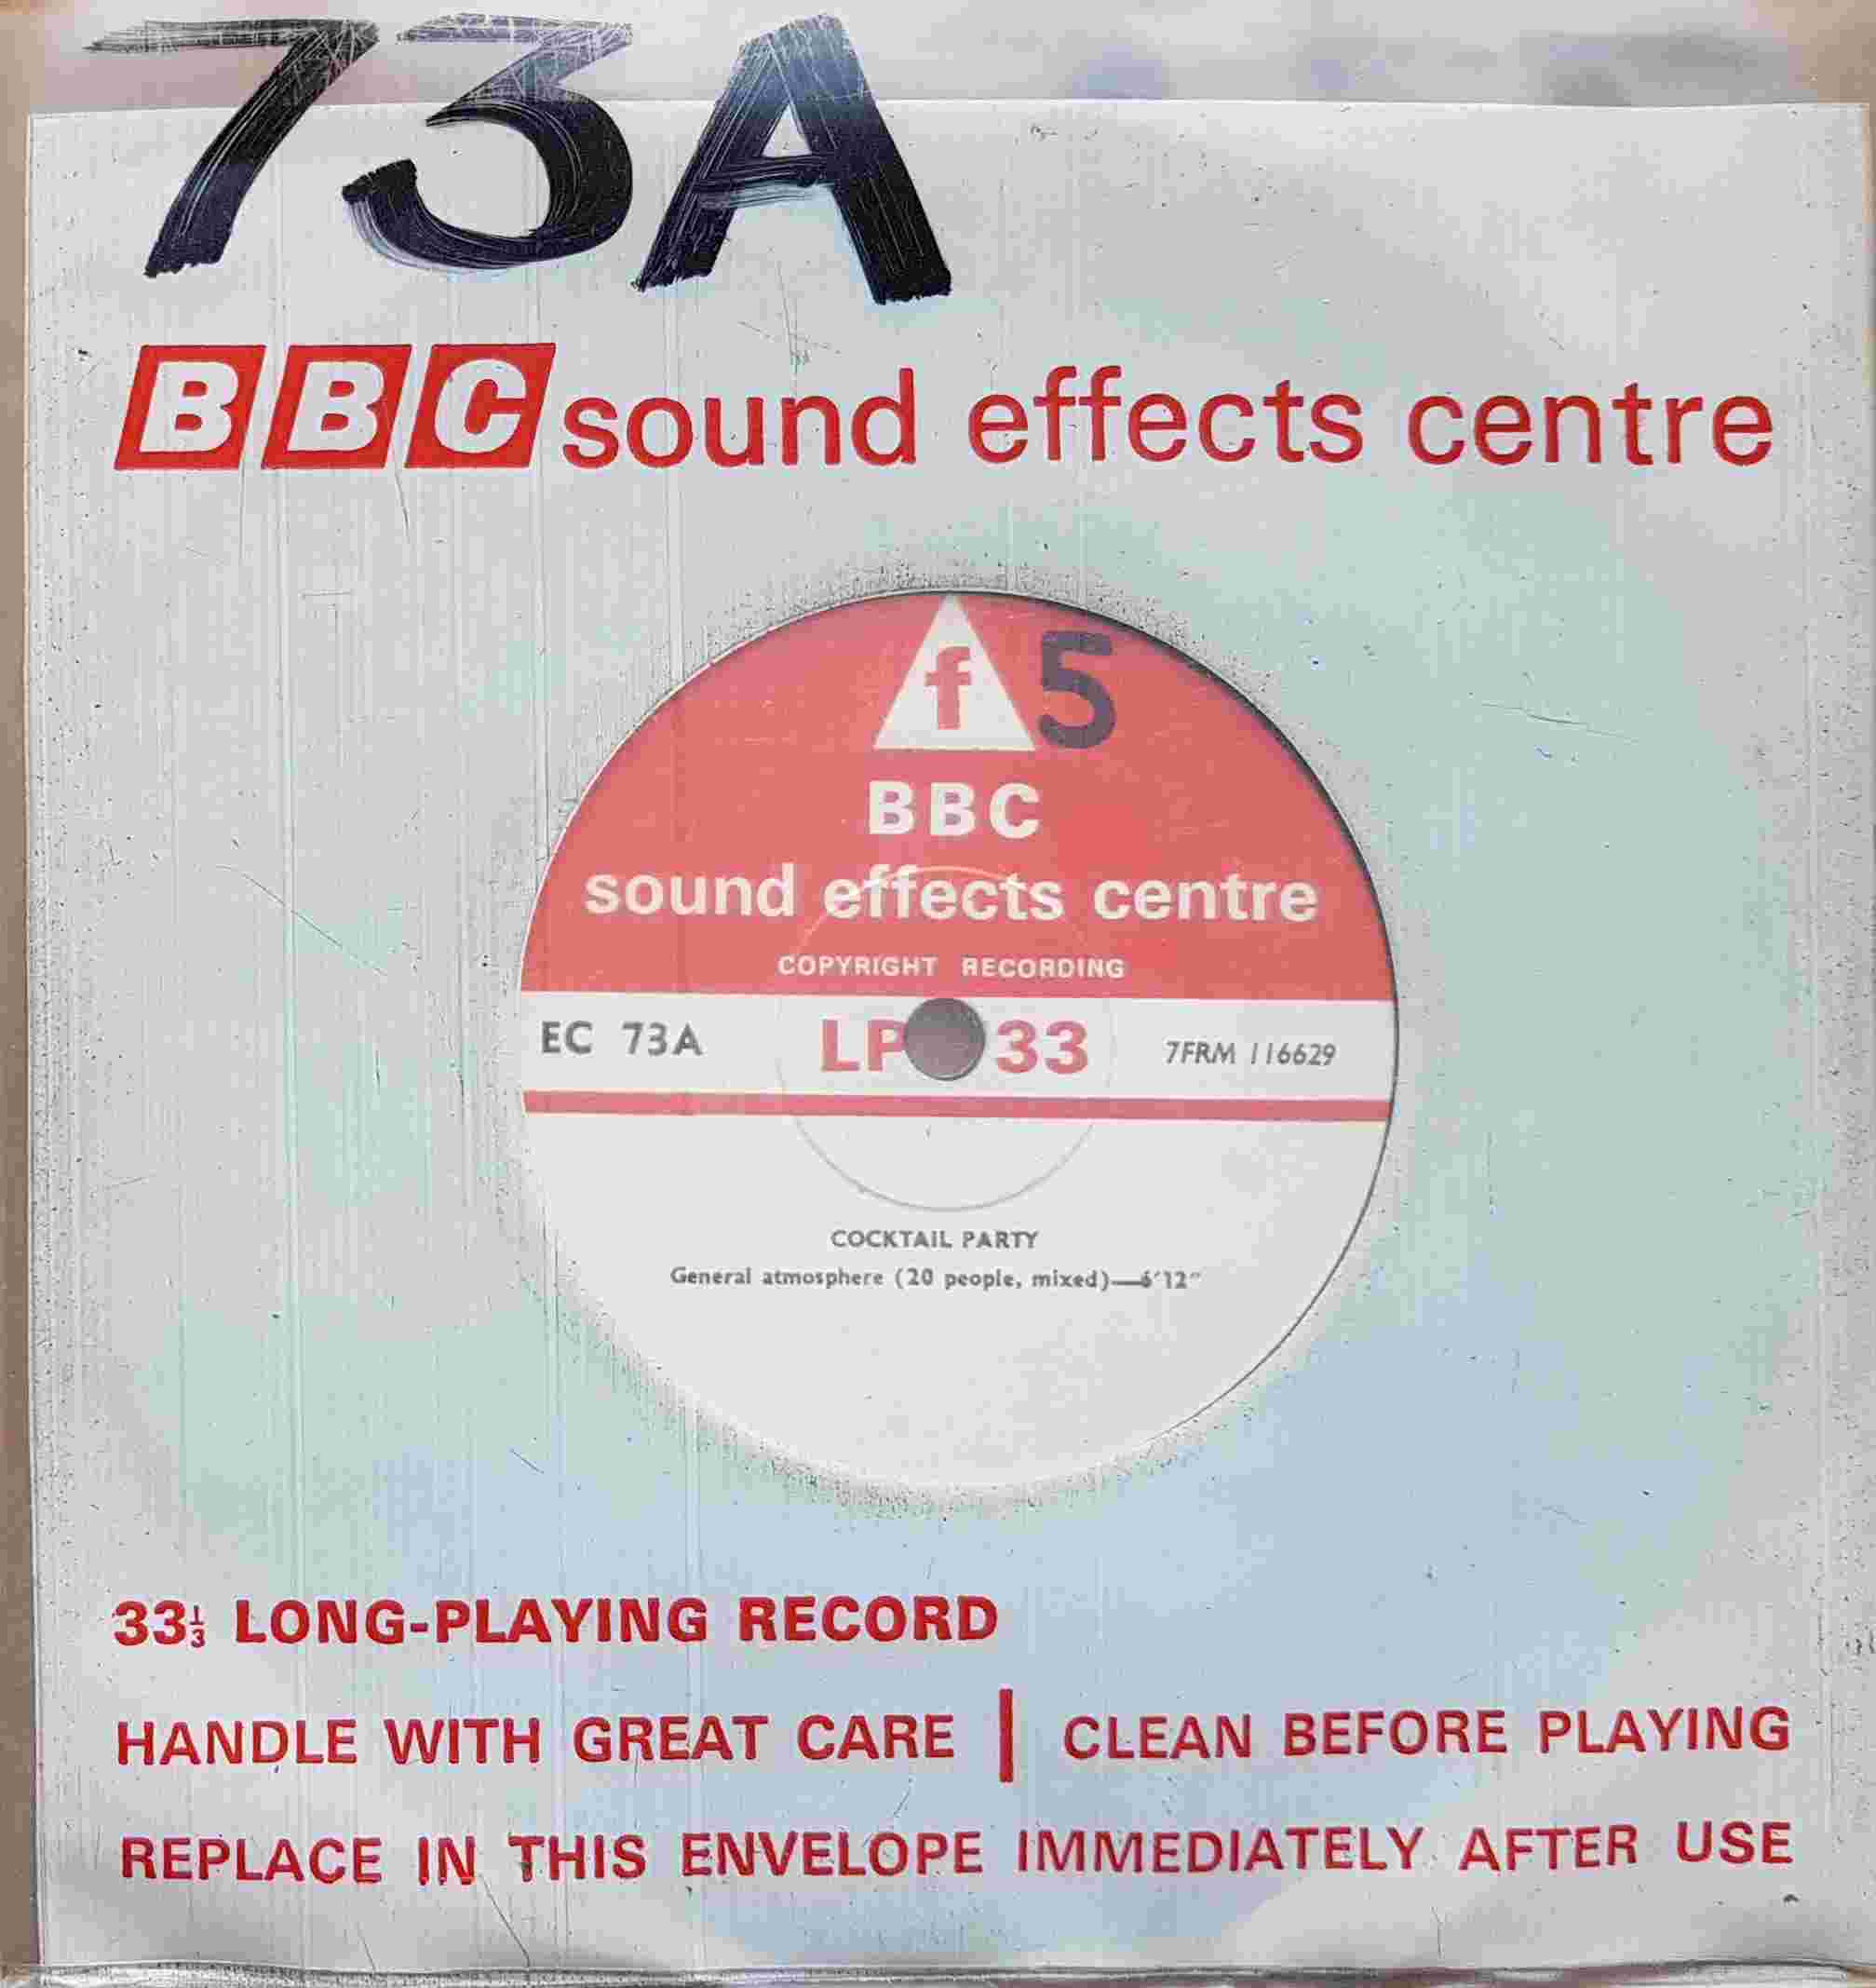 Picture of EC 73A Cocktail party by artist Not registered from the BBC singles - Records and Tapes library